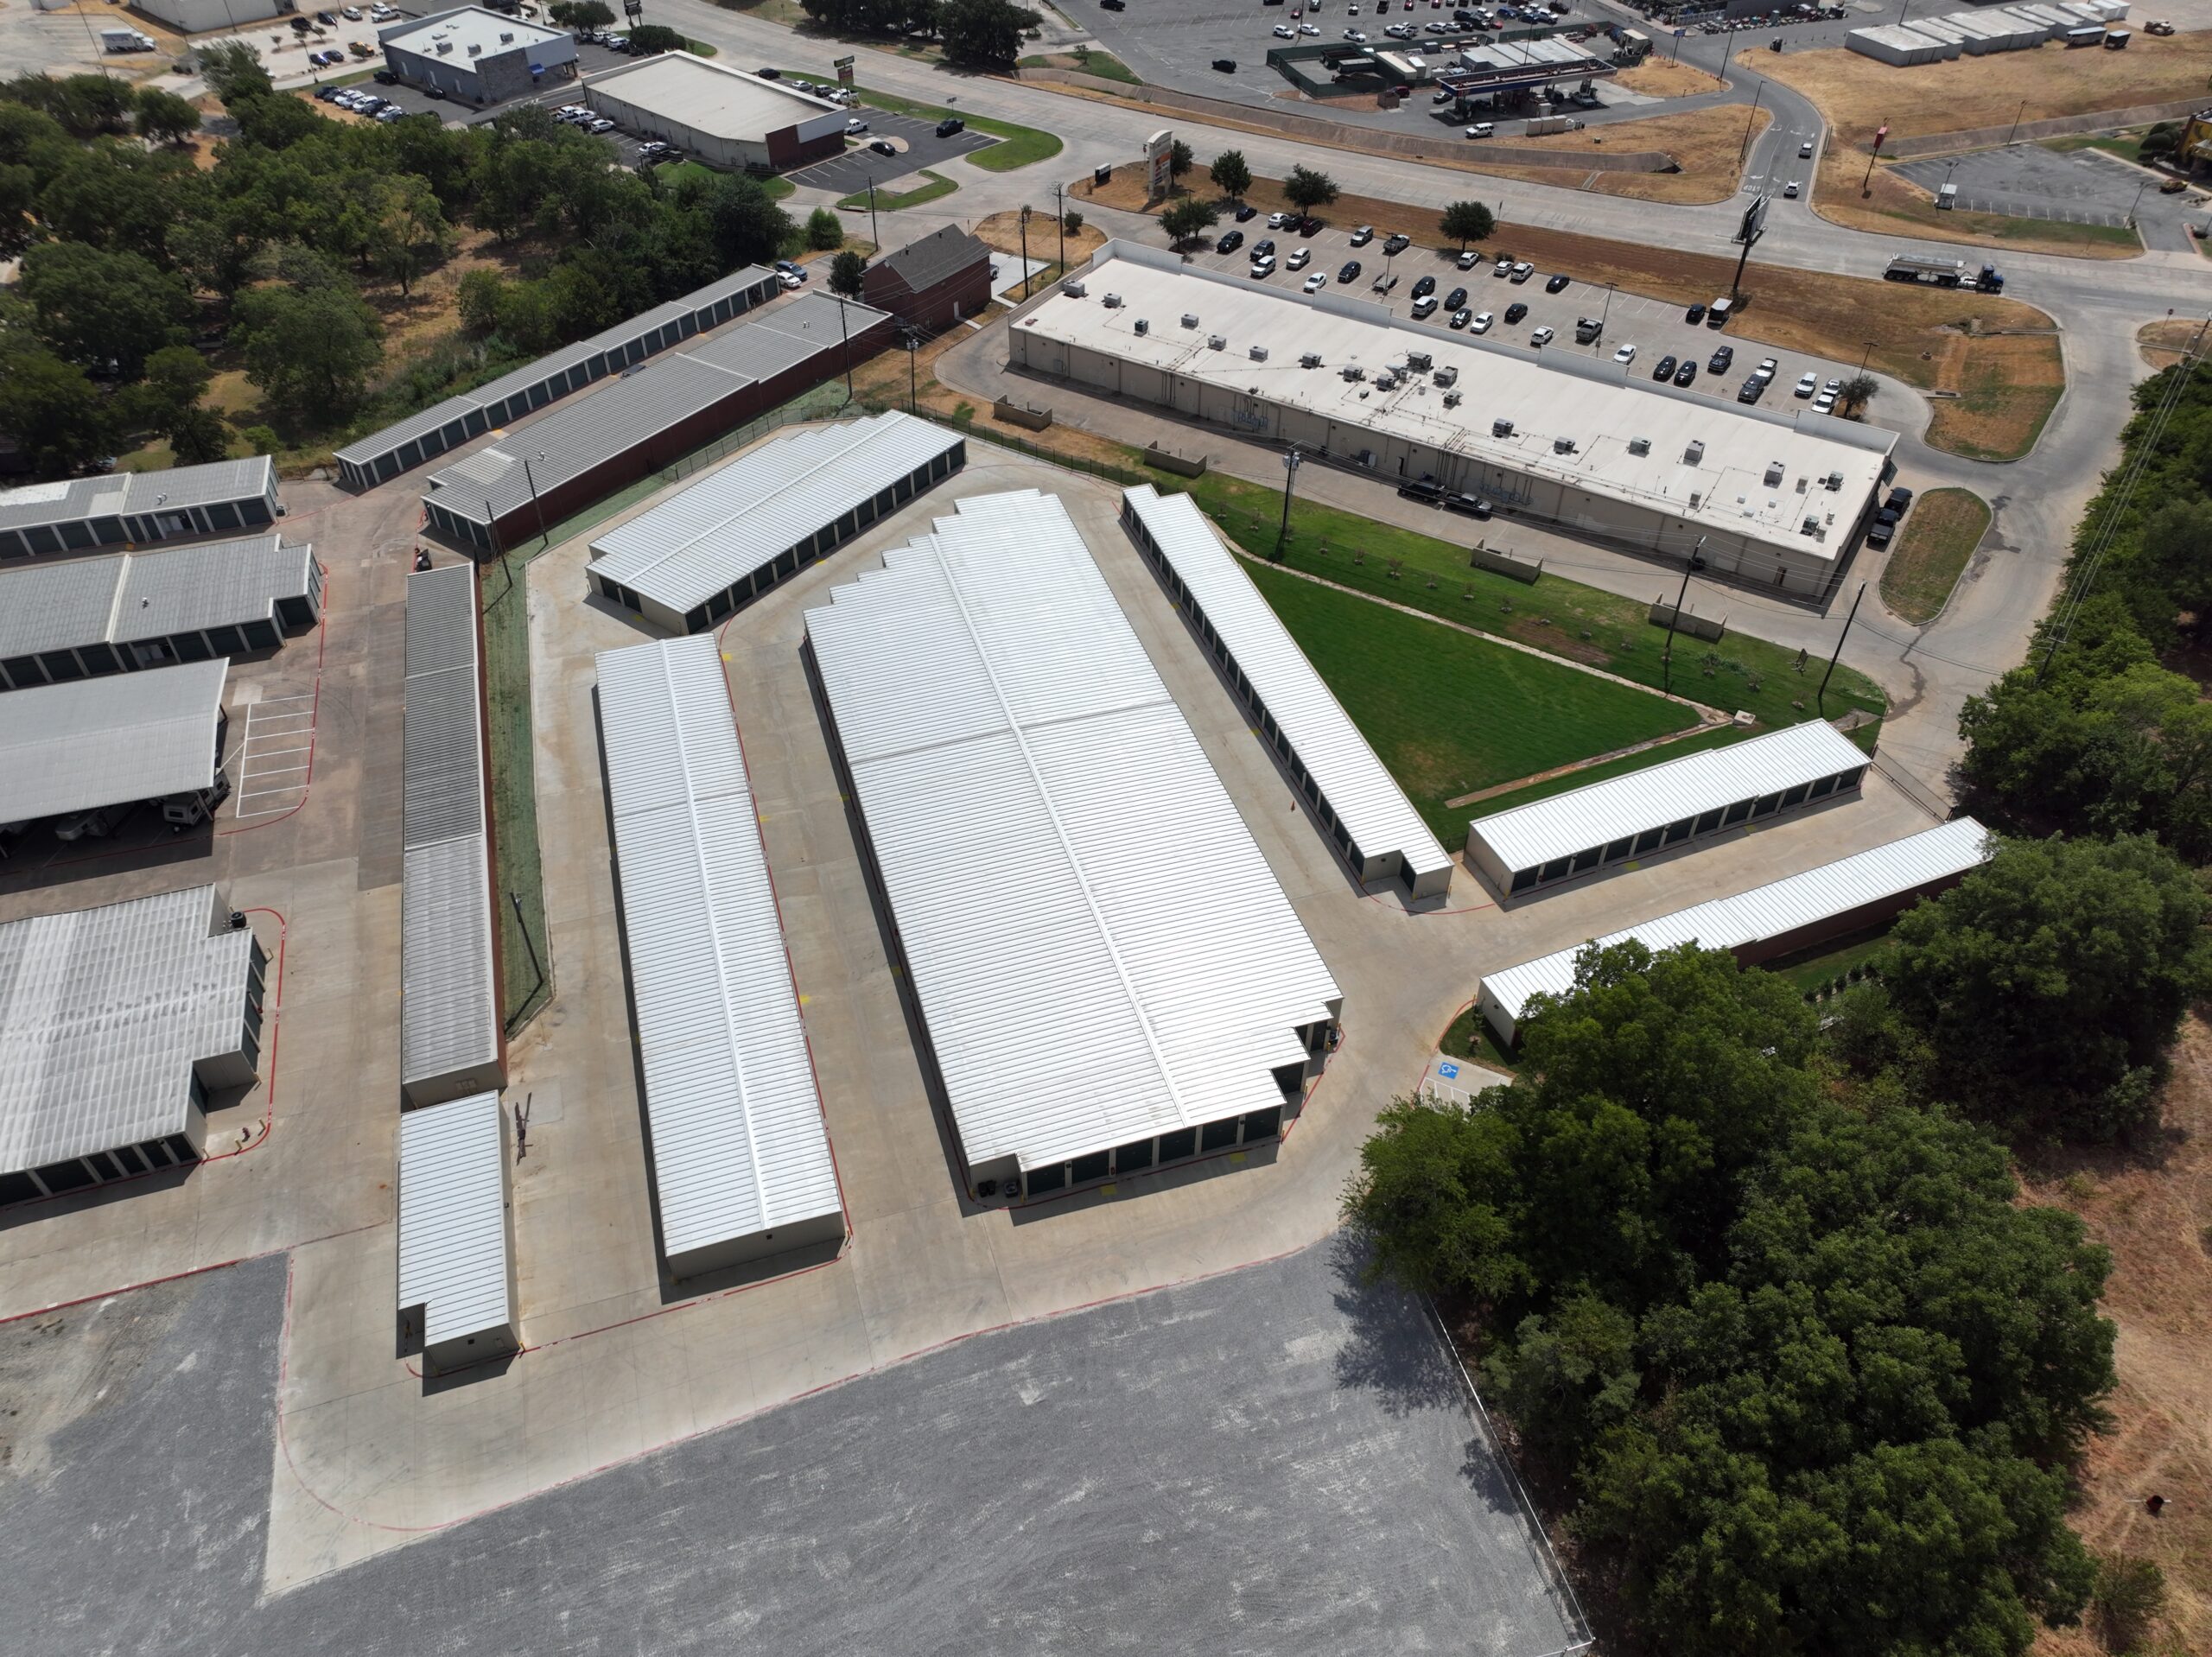 An aerial view of the Five Star Storage facility in Denison.